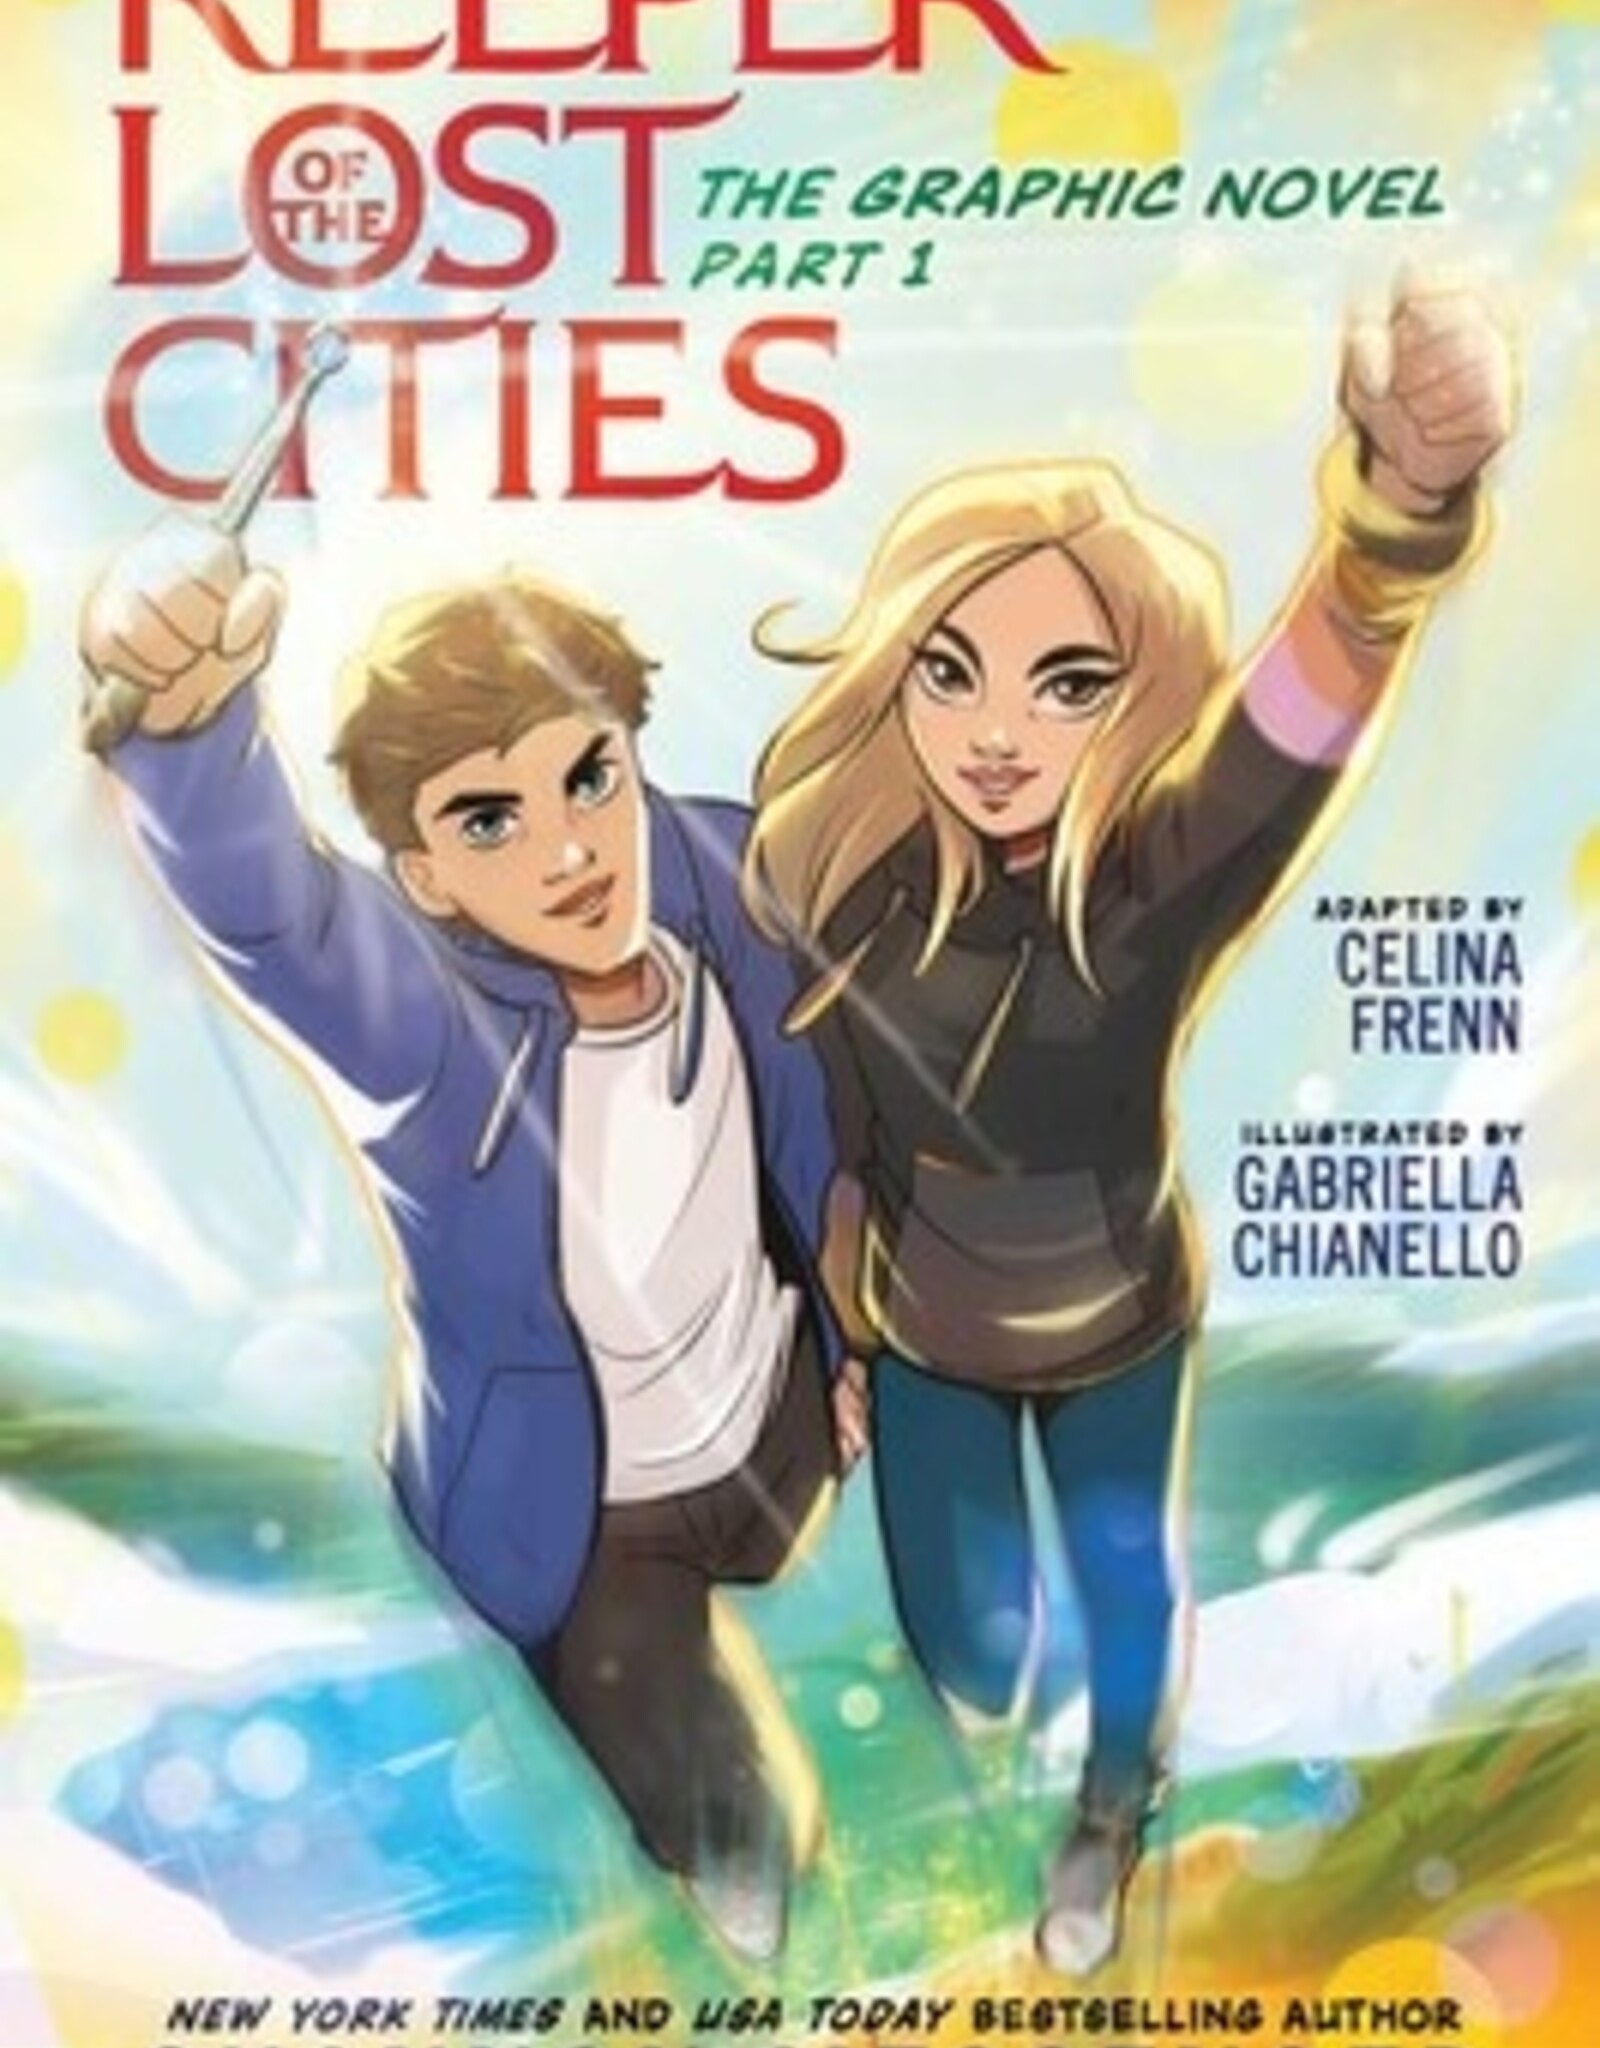 Simon & Schuster Keeper of the Lost Cities The Graphic Novel Part 1